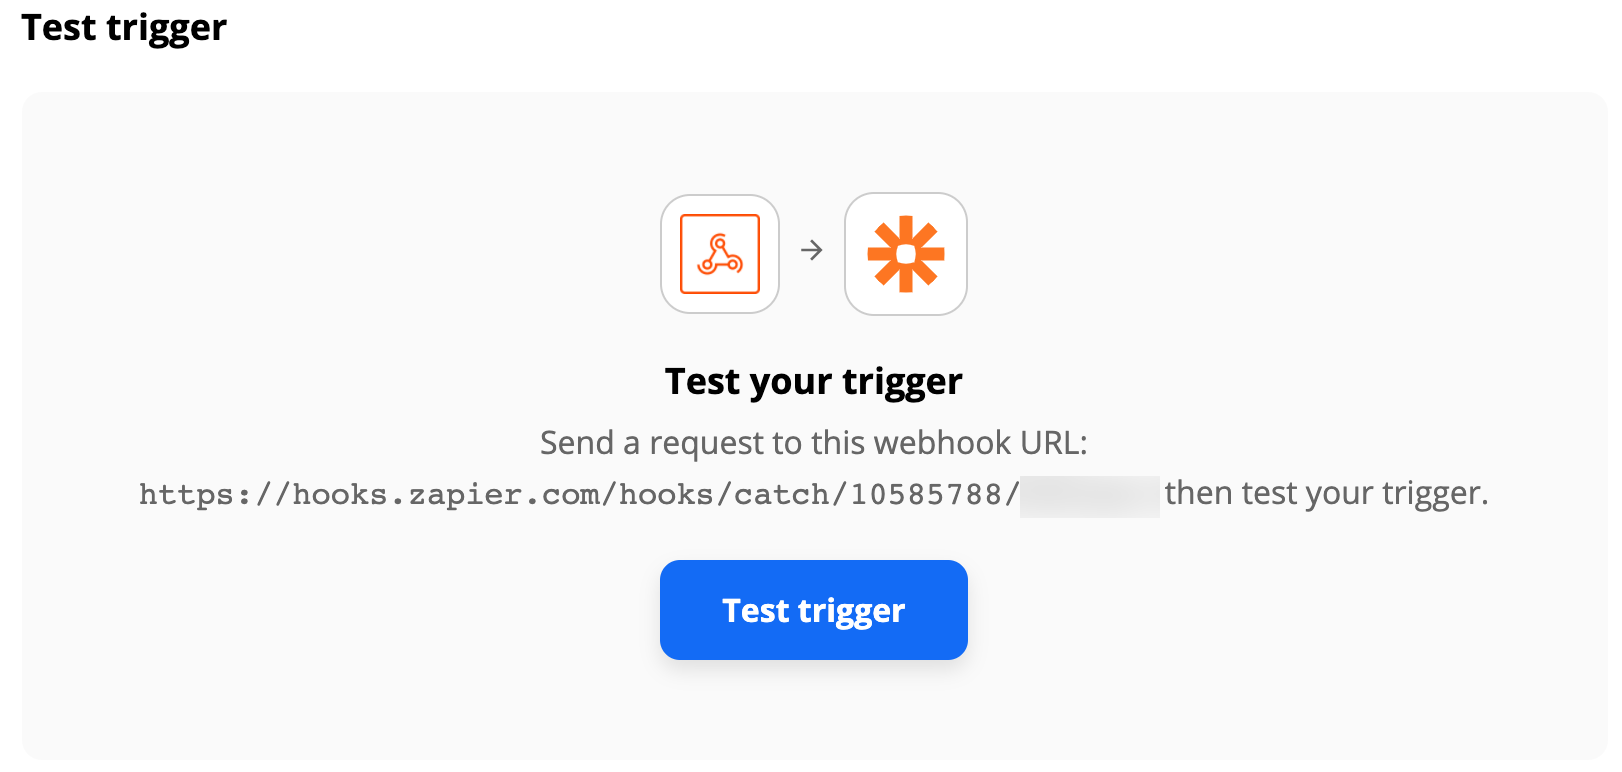 Test trigger page, with Test trigger button in center